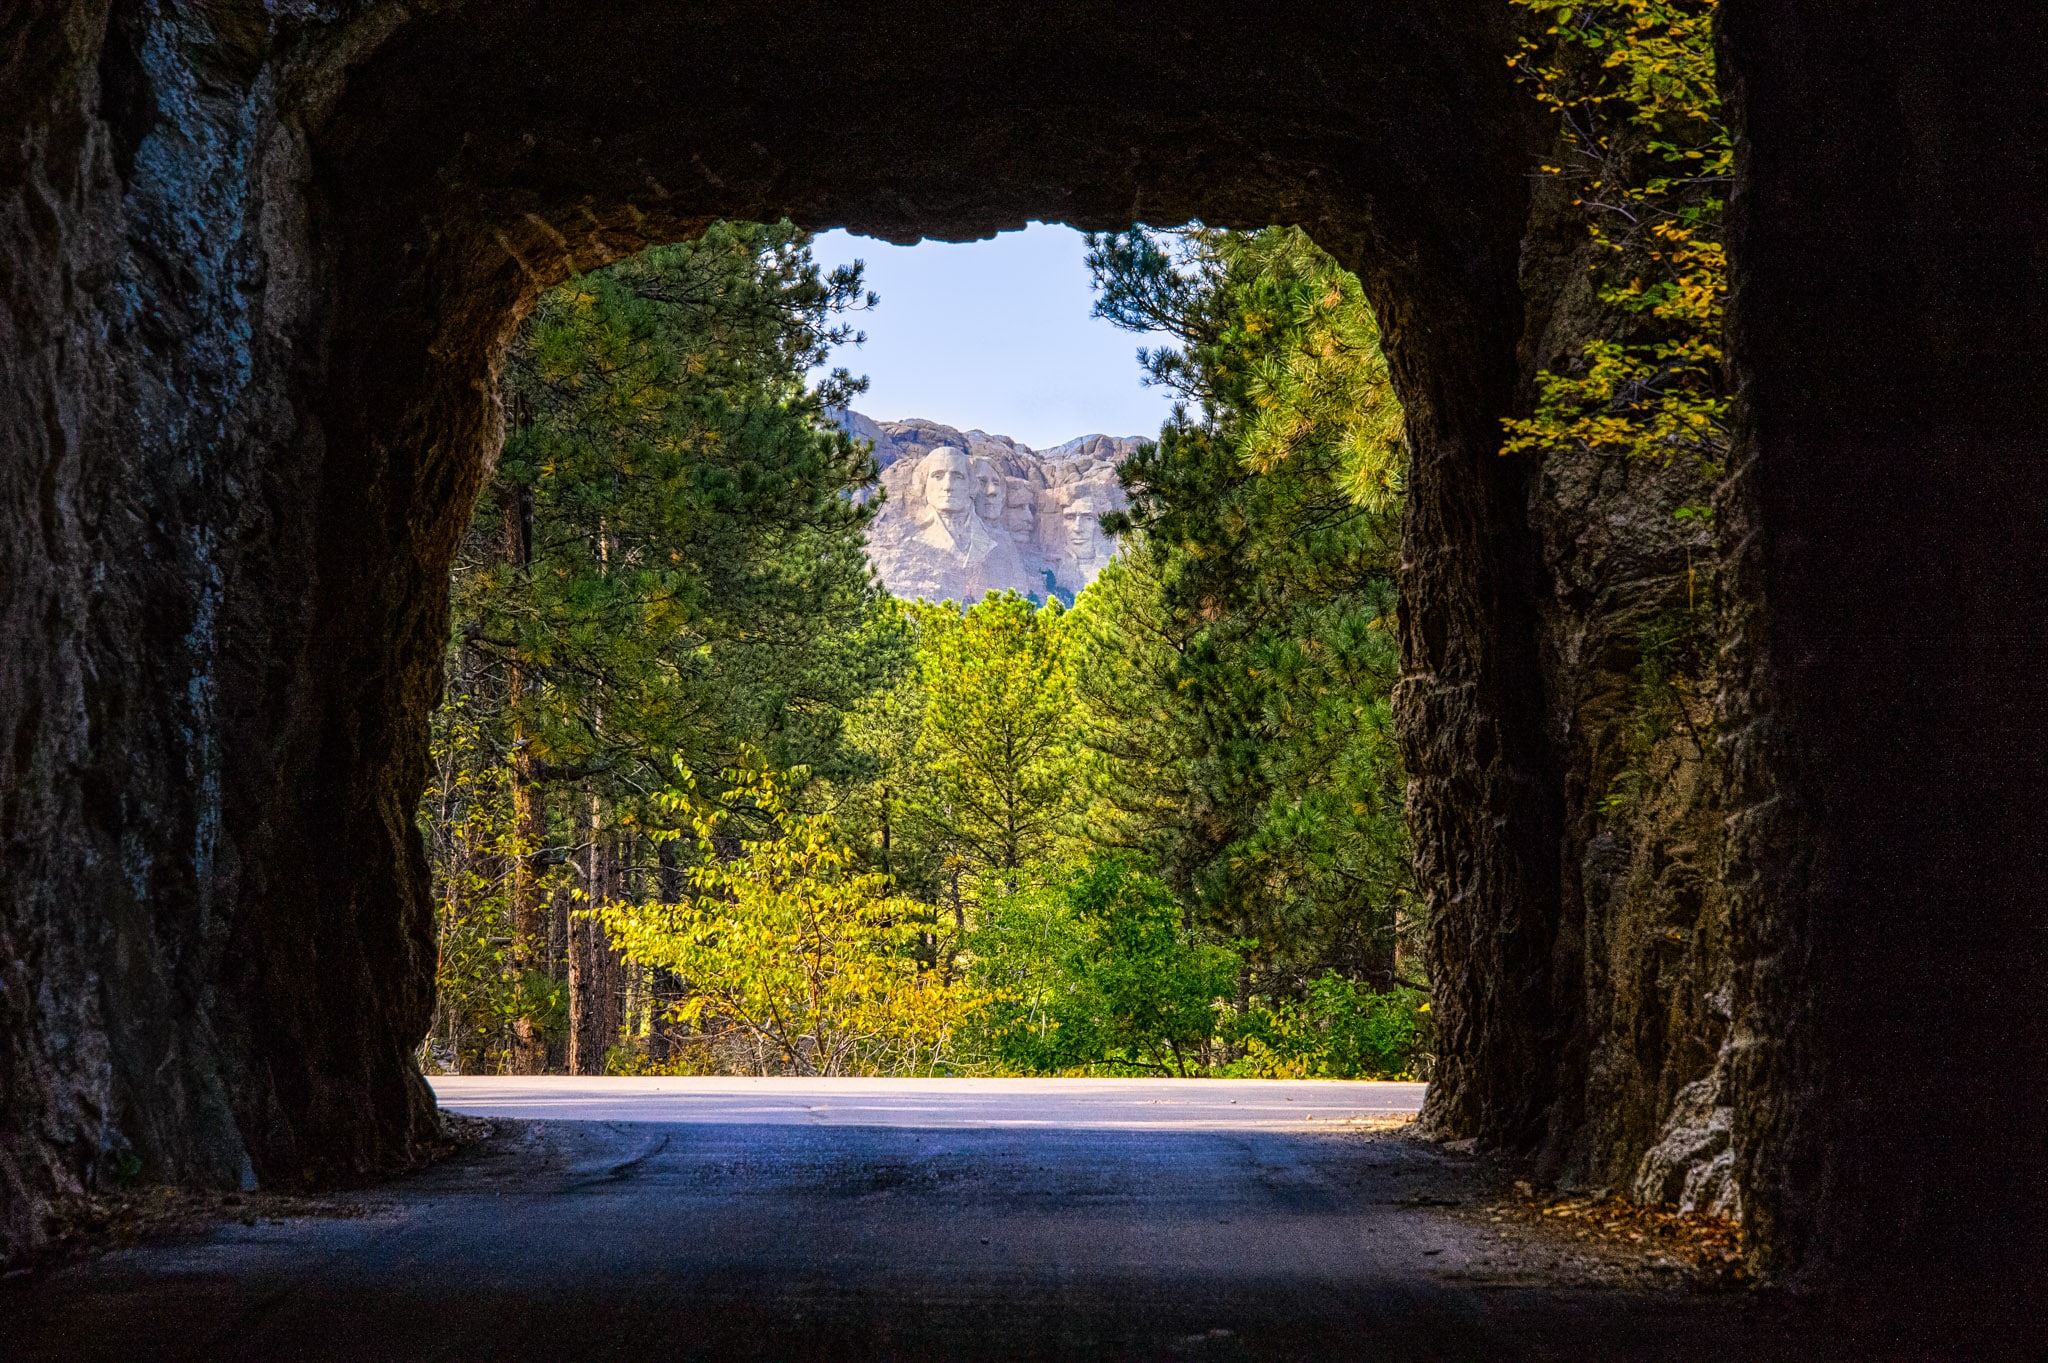 The presidents of Mount Rushmore are nicely framed by one of several tunnels on the Iron Mountain Highway in the Black Hills National Forest of South Dakota.